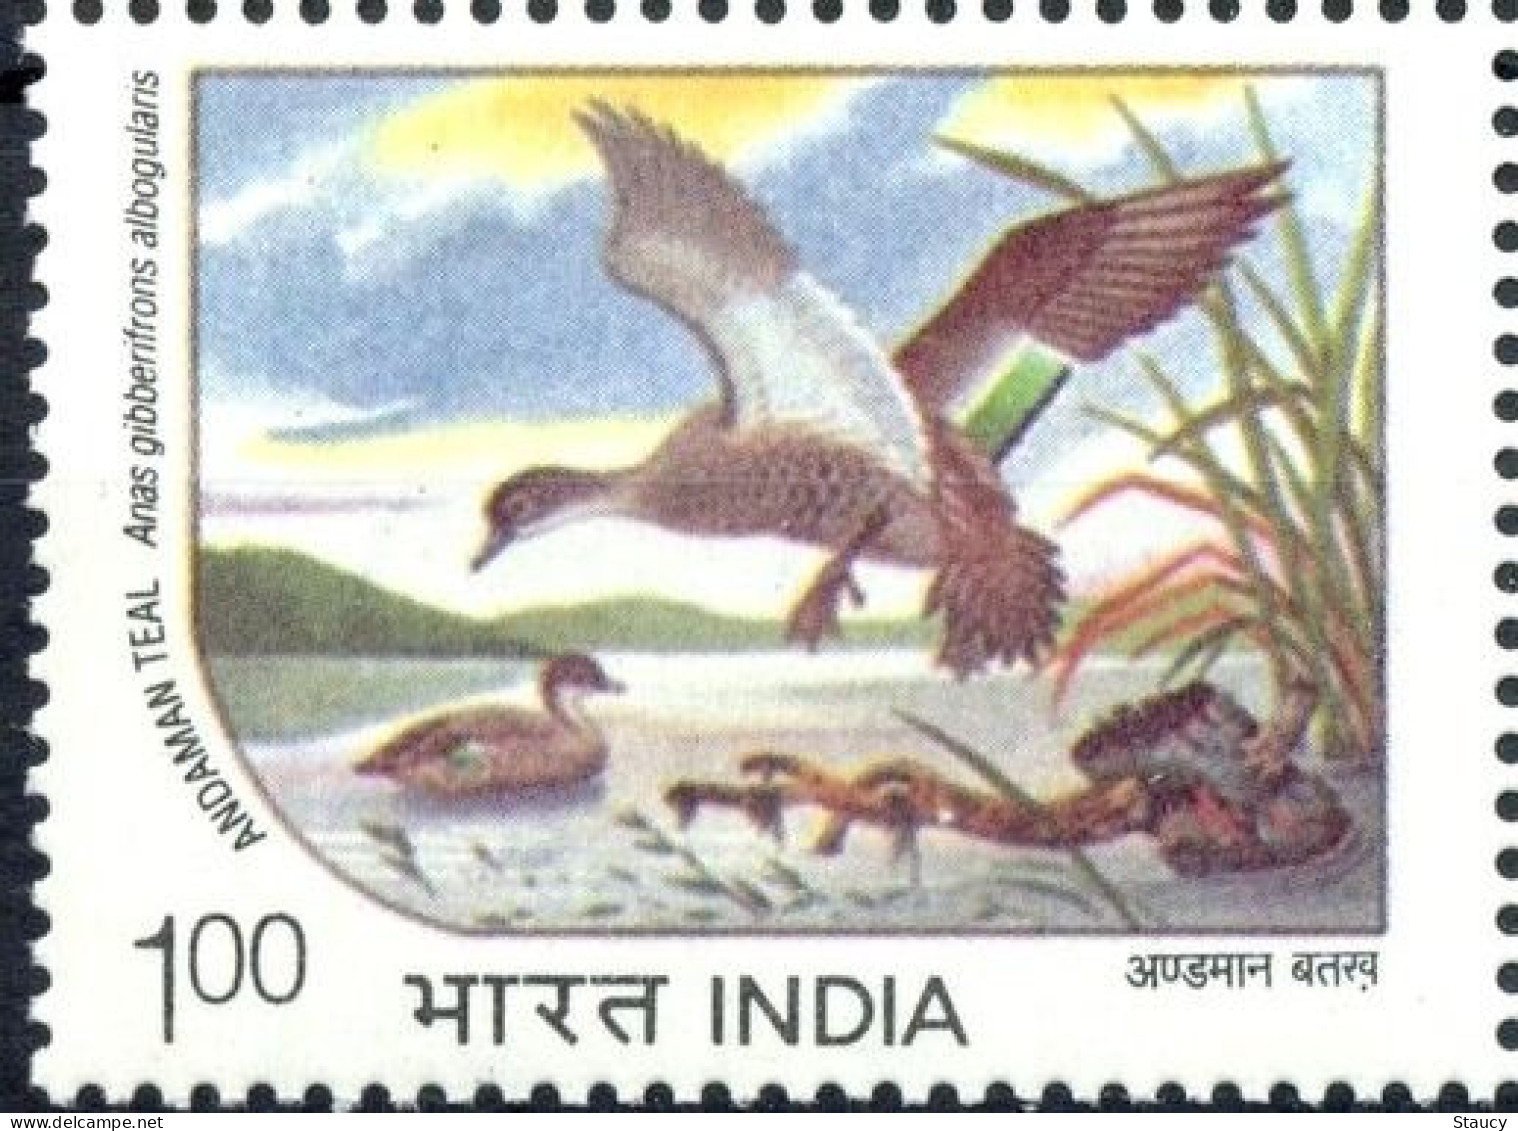 INDIA 1994 Endangered Water Birds 1v STAMP MNH "WITHDRAWN" ISSUE As Per Scan - Oies